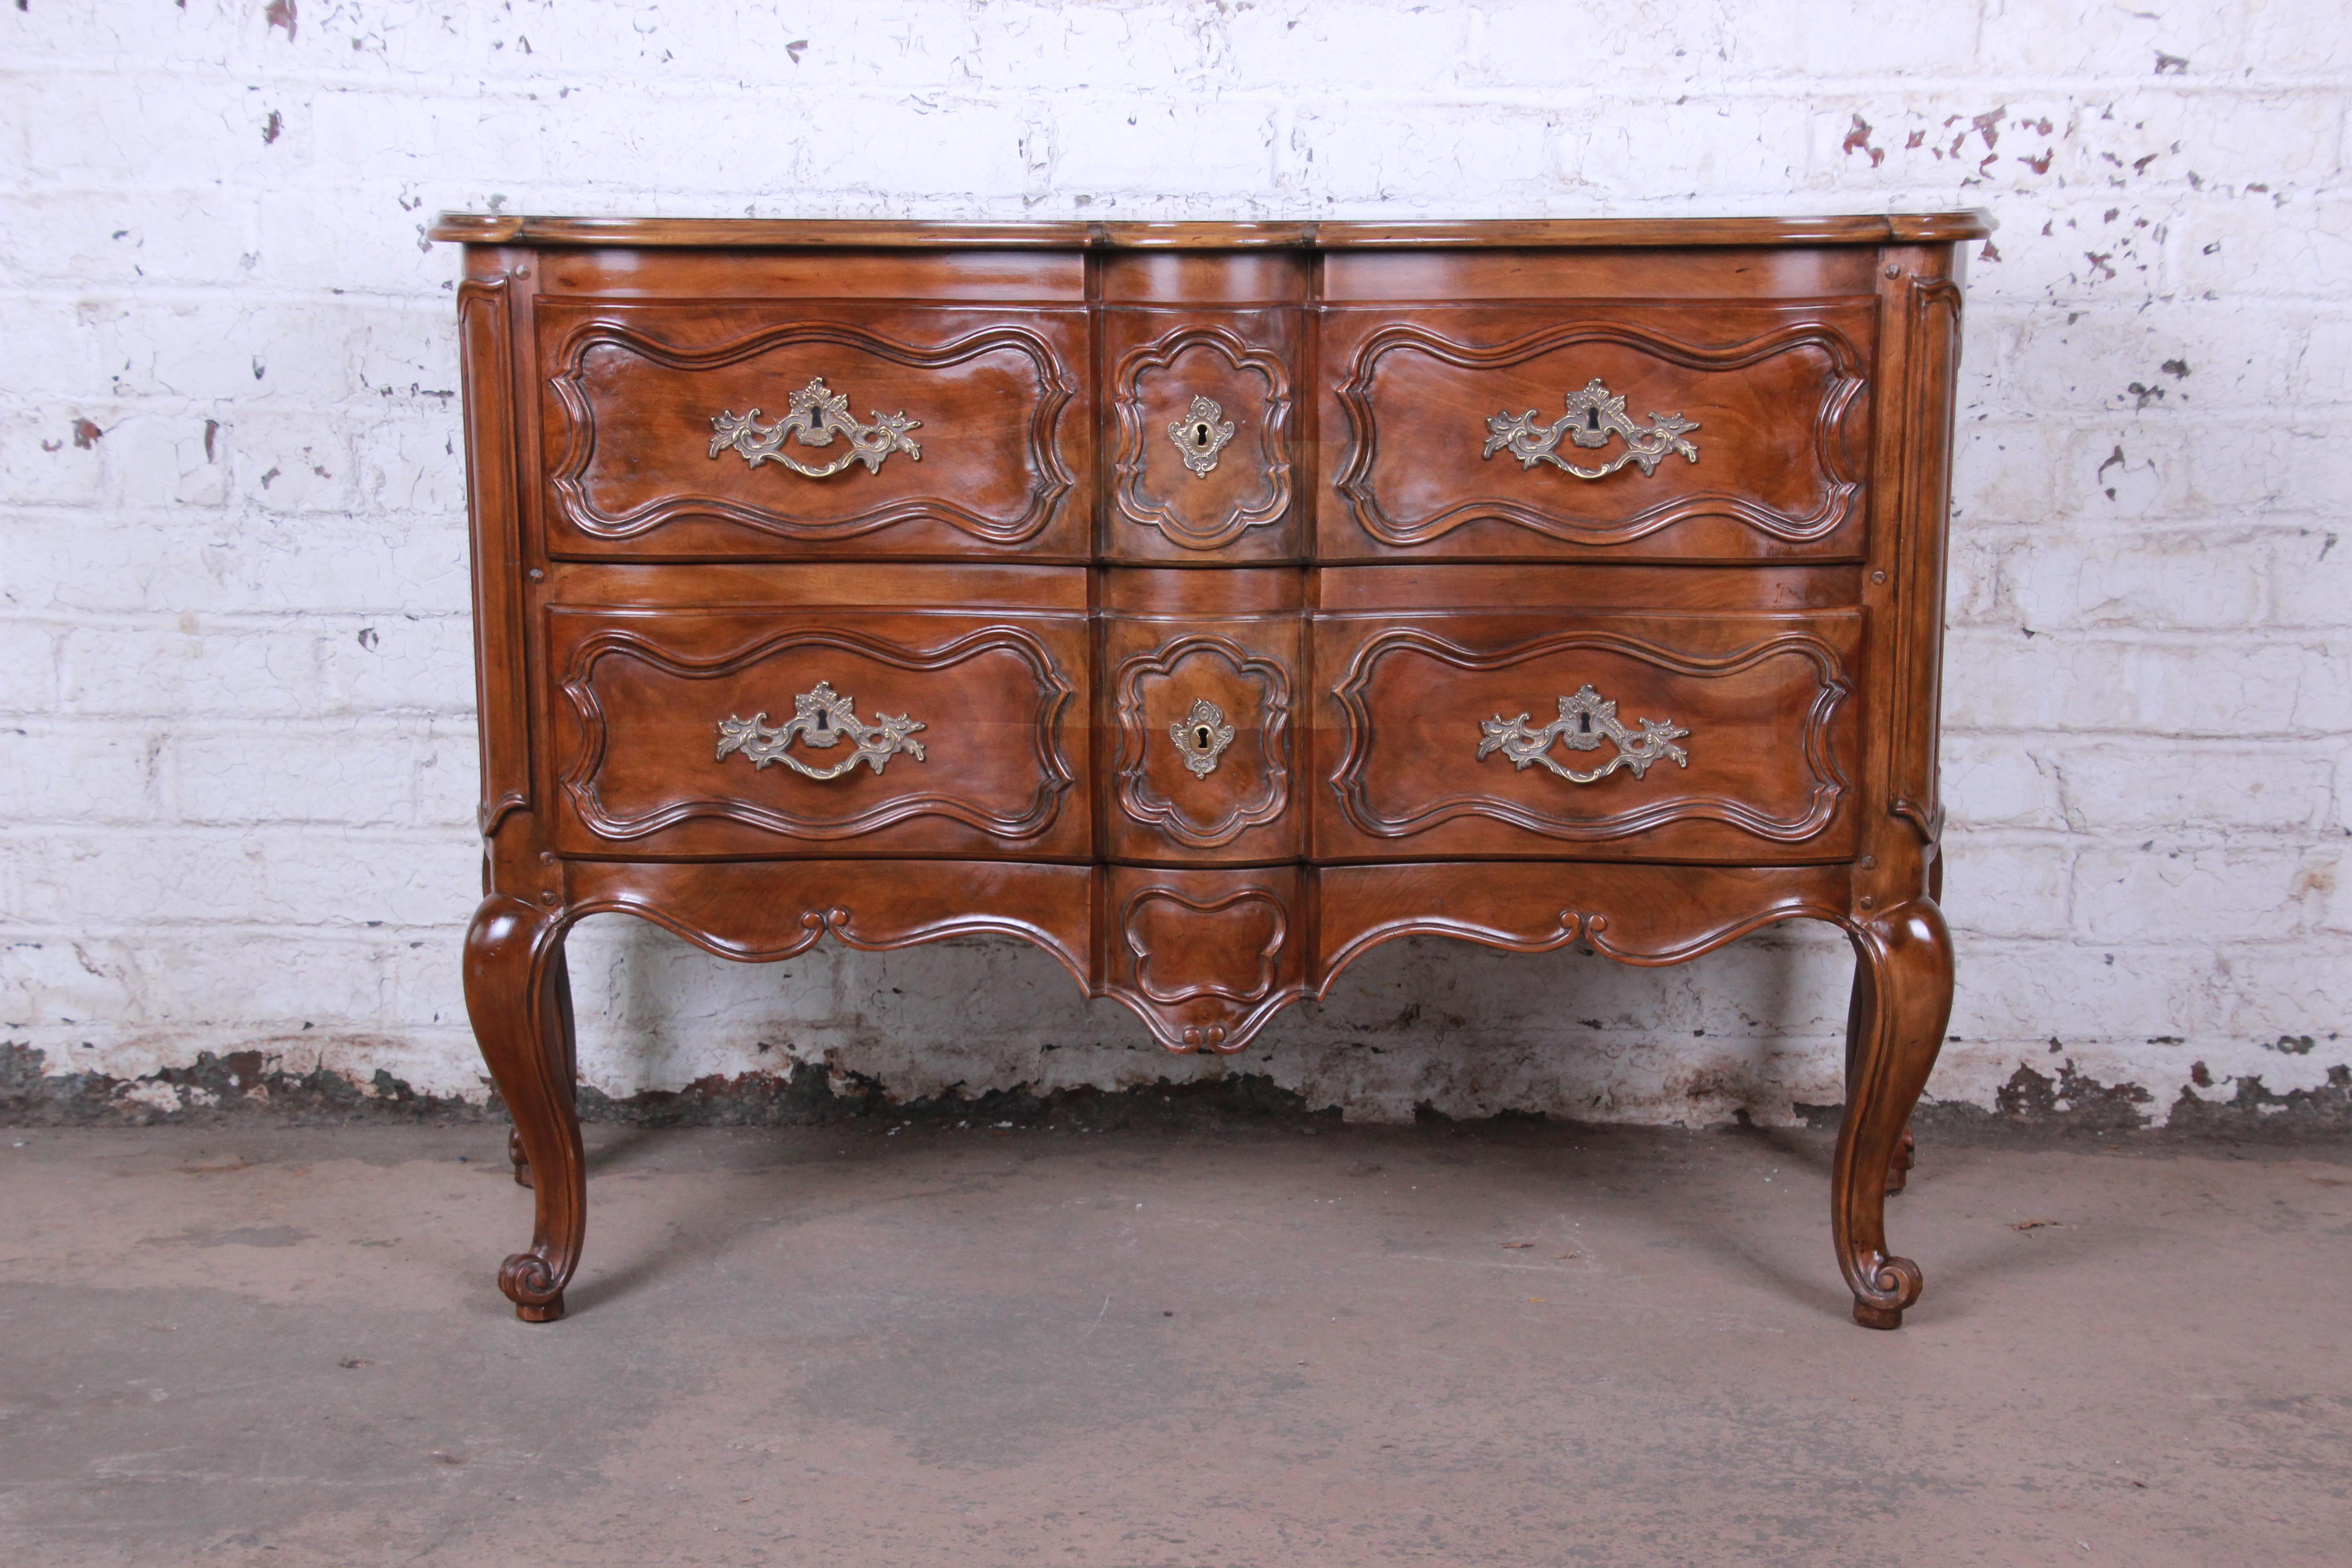 A gorgeous French Louis XV style sideboard server or commode by Baker Furniture. The commode features nice French carved details and beautiful walnut wood grain. It offers good storage, with two deep dovetailed drawers. Brass hardware is original. A